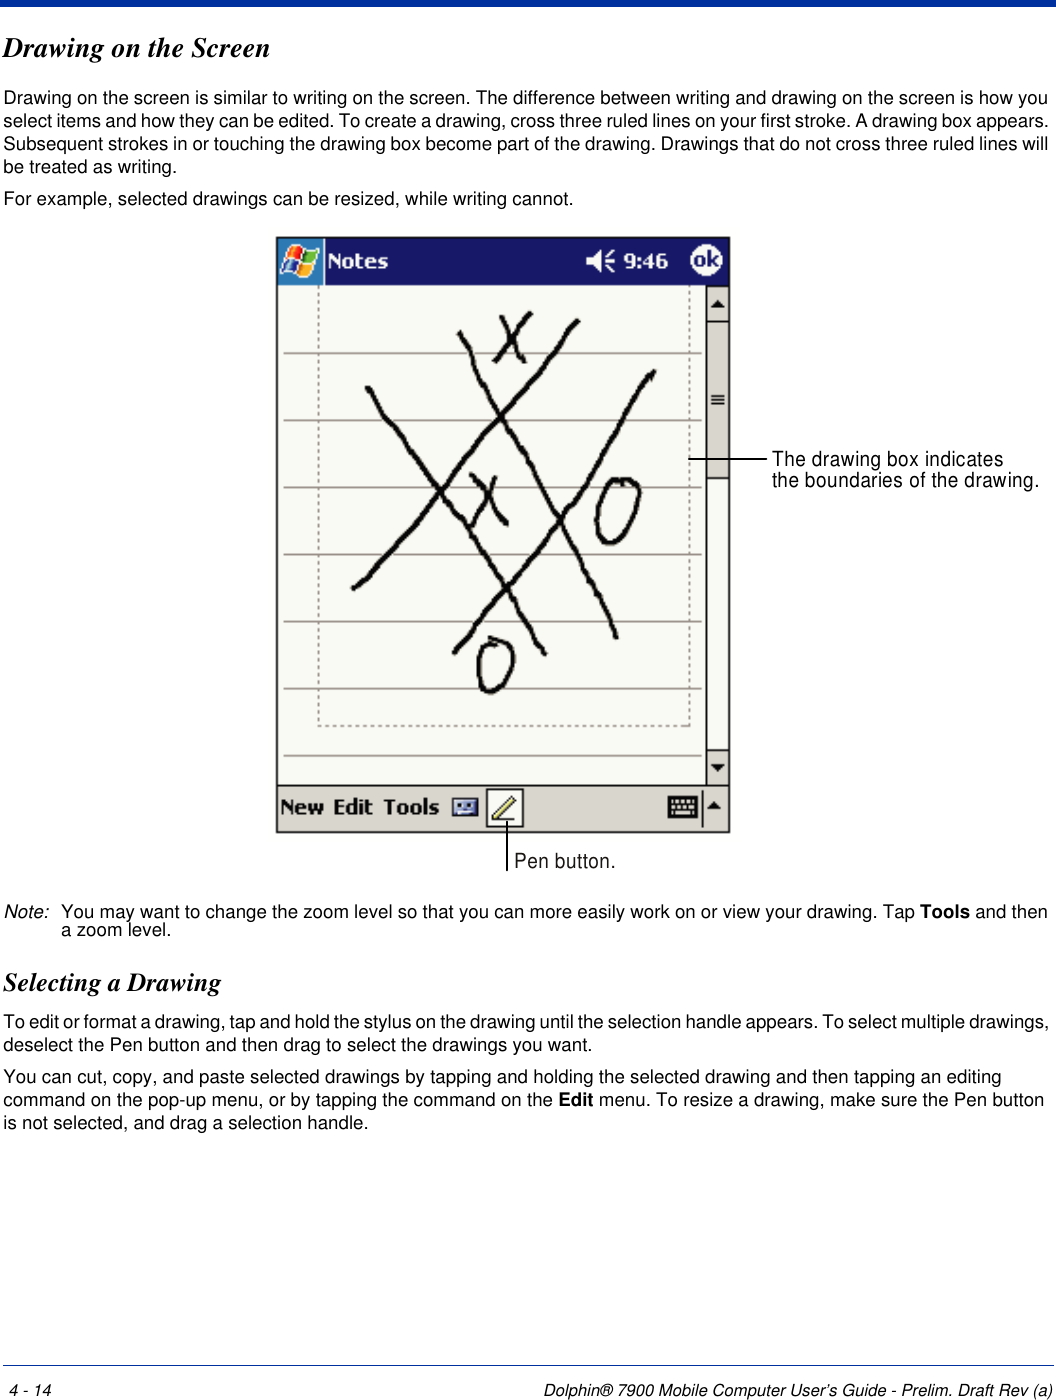 4 - 14 Dolphin® 7900 Mobile Computer User’s Guide - Prelim. Draft Rev (a)Drawing on the ScreenDrawing on the screen is similar to writing on the screen. The difference between writing and drawing on the screen is how you select items and how they can be edited. To create a drawing, cross three ruled lines on your first stroke. A drawing box appears. Subsequent strokes in or touching the drawing box become part of the drawing. Drawings that do not cross three ruled lines will be treated as writing.For example, selected drawings can be resized, while writing cannot.Note: You may want to change the zoom level so that you can more easily work on or view your drawing. Tap Tools and then a zoom level.Selecting a DrawingTo edit or format a drawing, tap and hold the stylus on the drawing until the selection handle appears. To select multiple drawings, deselect the Pen button and then drag to select the drawings you want.You can cut, copy, and paste selected drawings by tapping and holding the selected drawing and then tapping an editing command on the pop-up menu, or by tapping the command on the Edit menu. To resize a drawing, make sure the Pen button is not selected, and drag a selection handle.The drawing box indicatesthe boundaries of the drawing.Pen button.